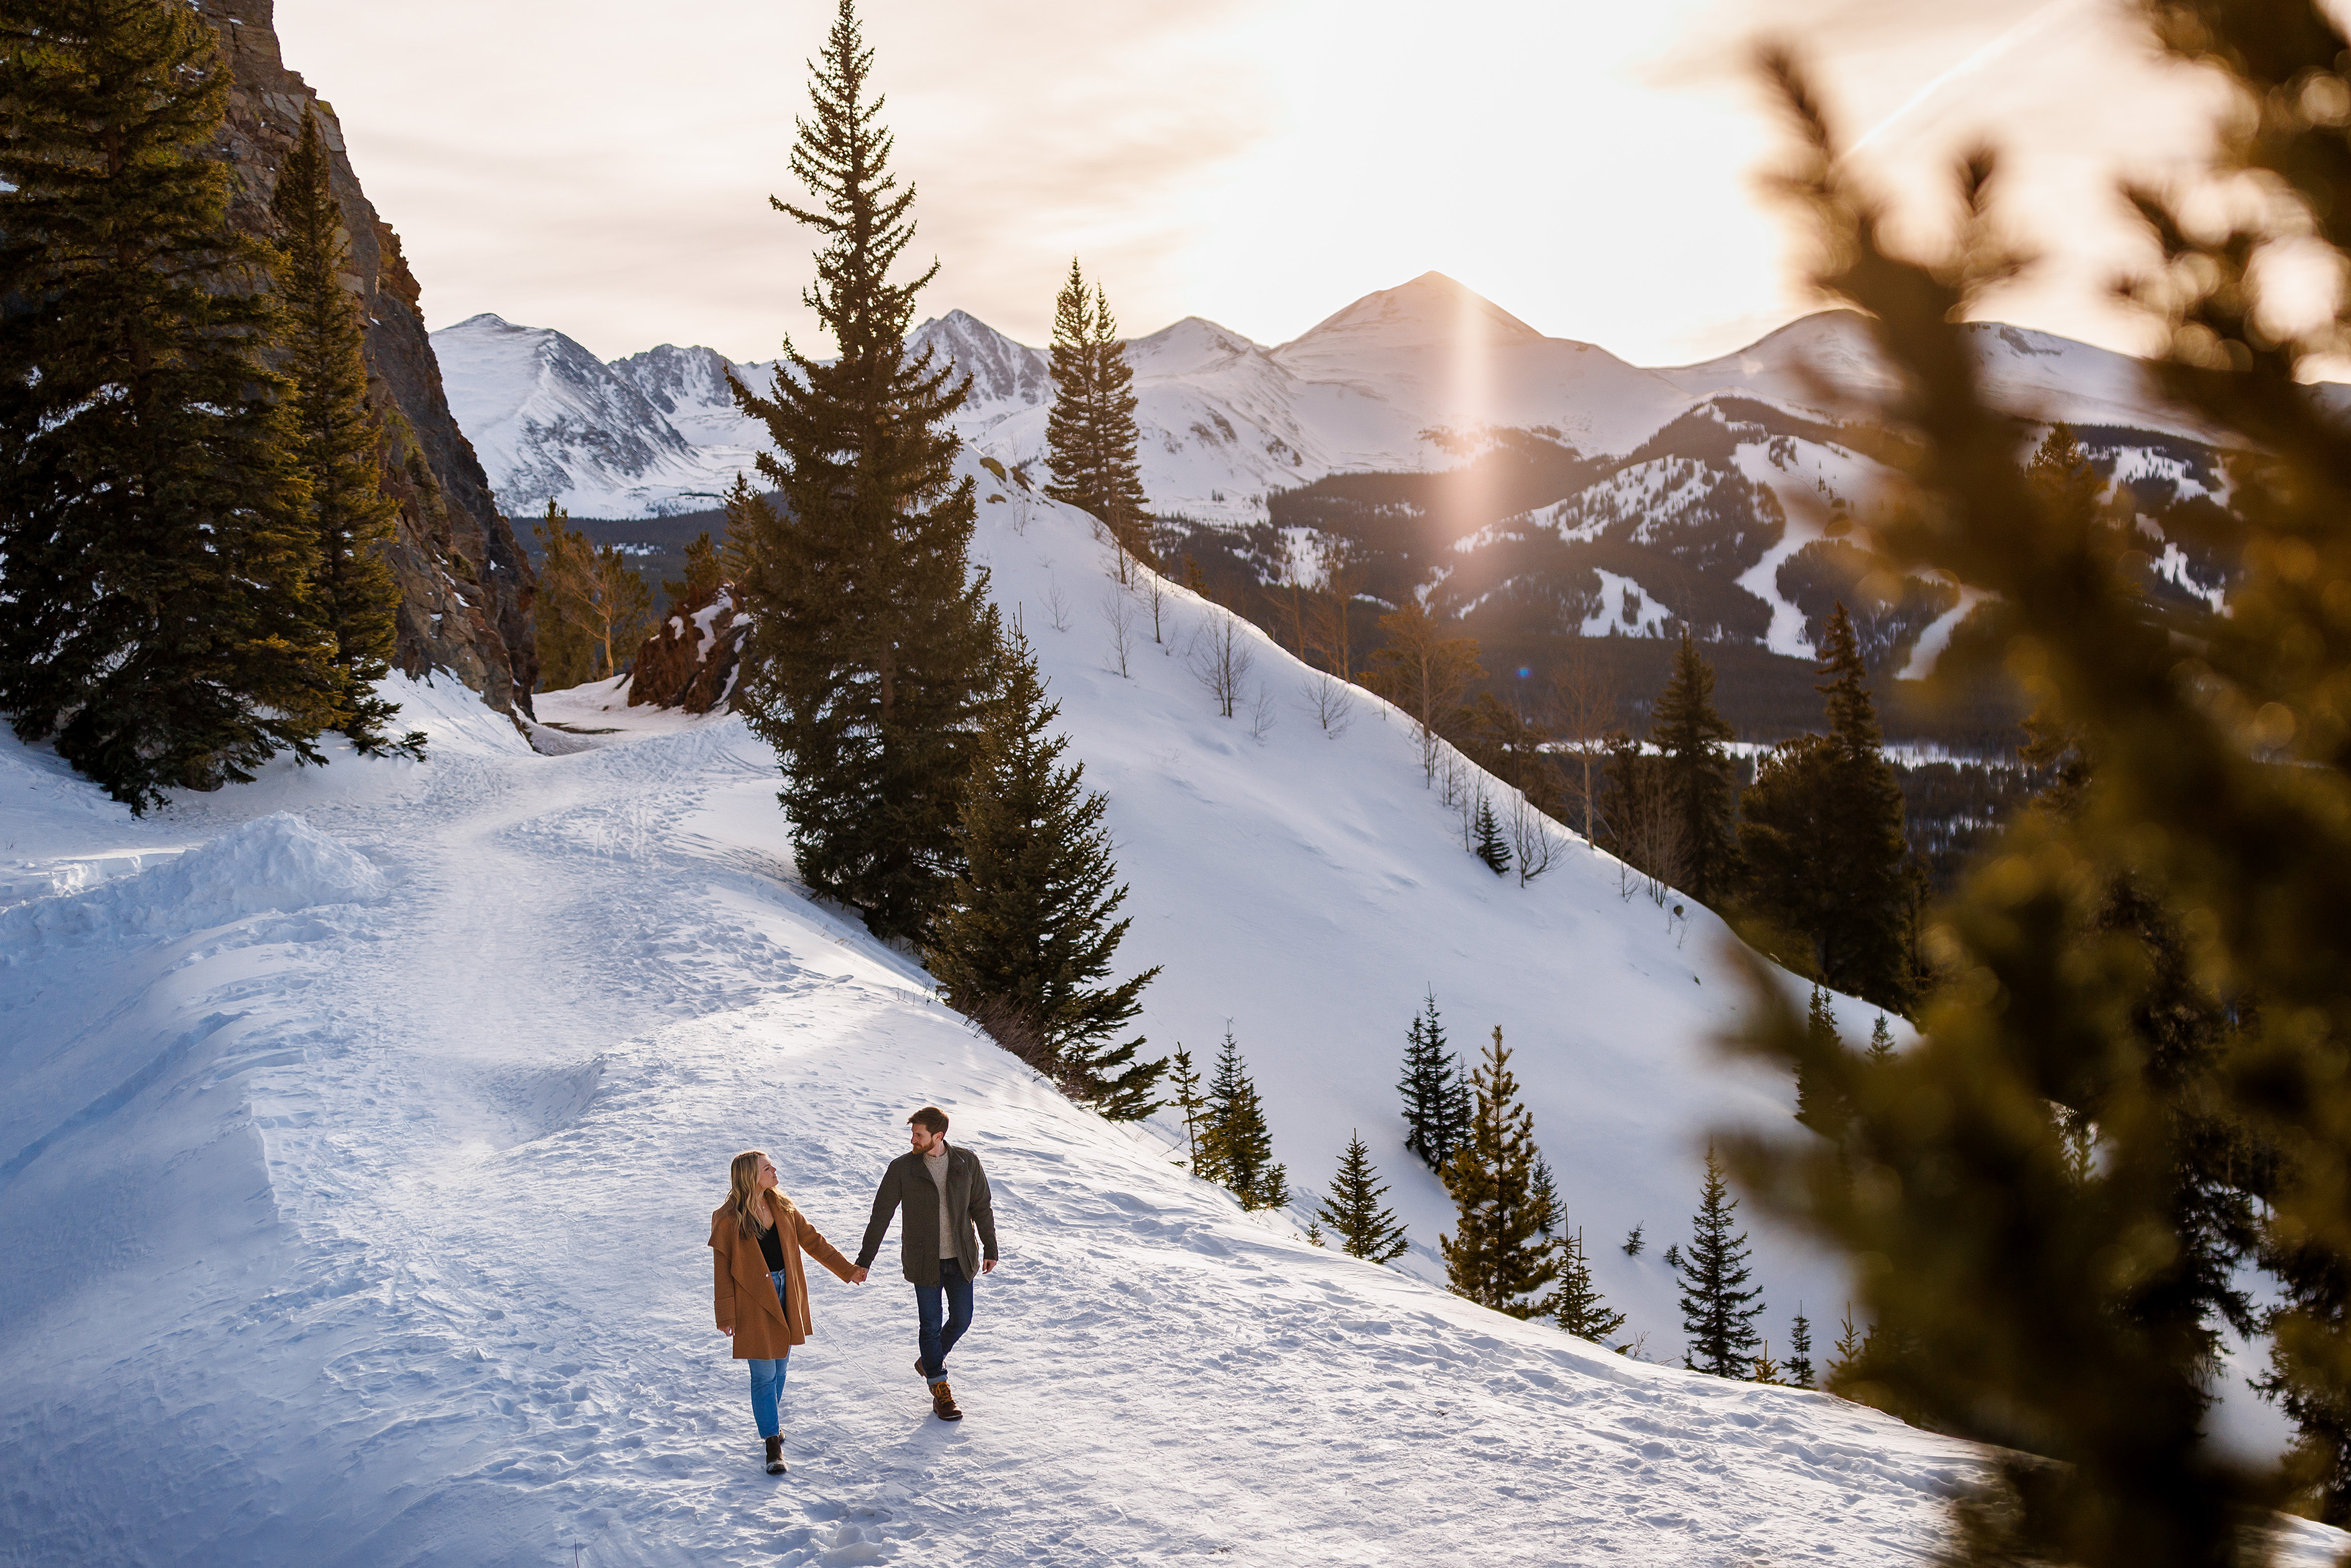 The couple walks along Boreas Pass near Breckenridge just before the sun sets over the Tenmile Range to the West.